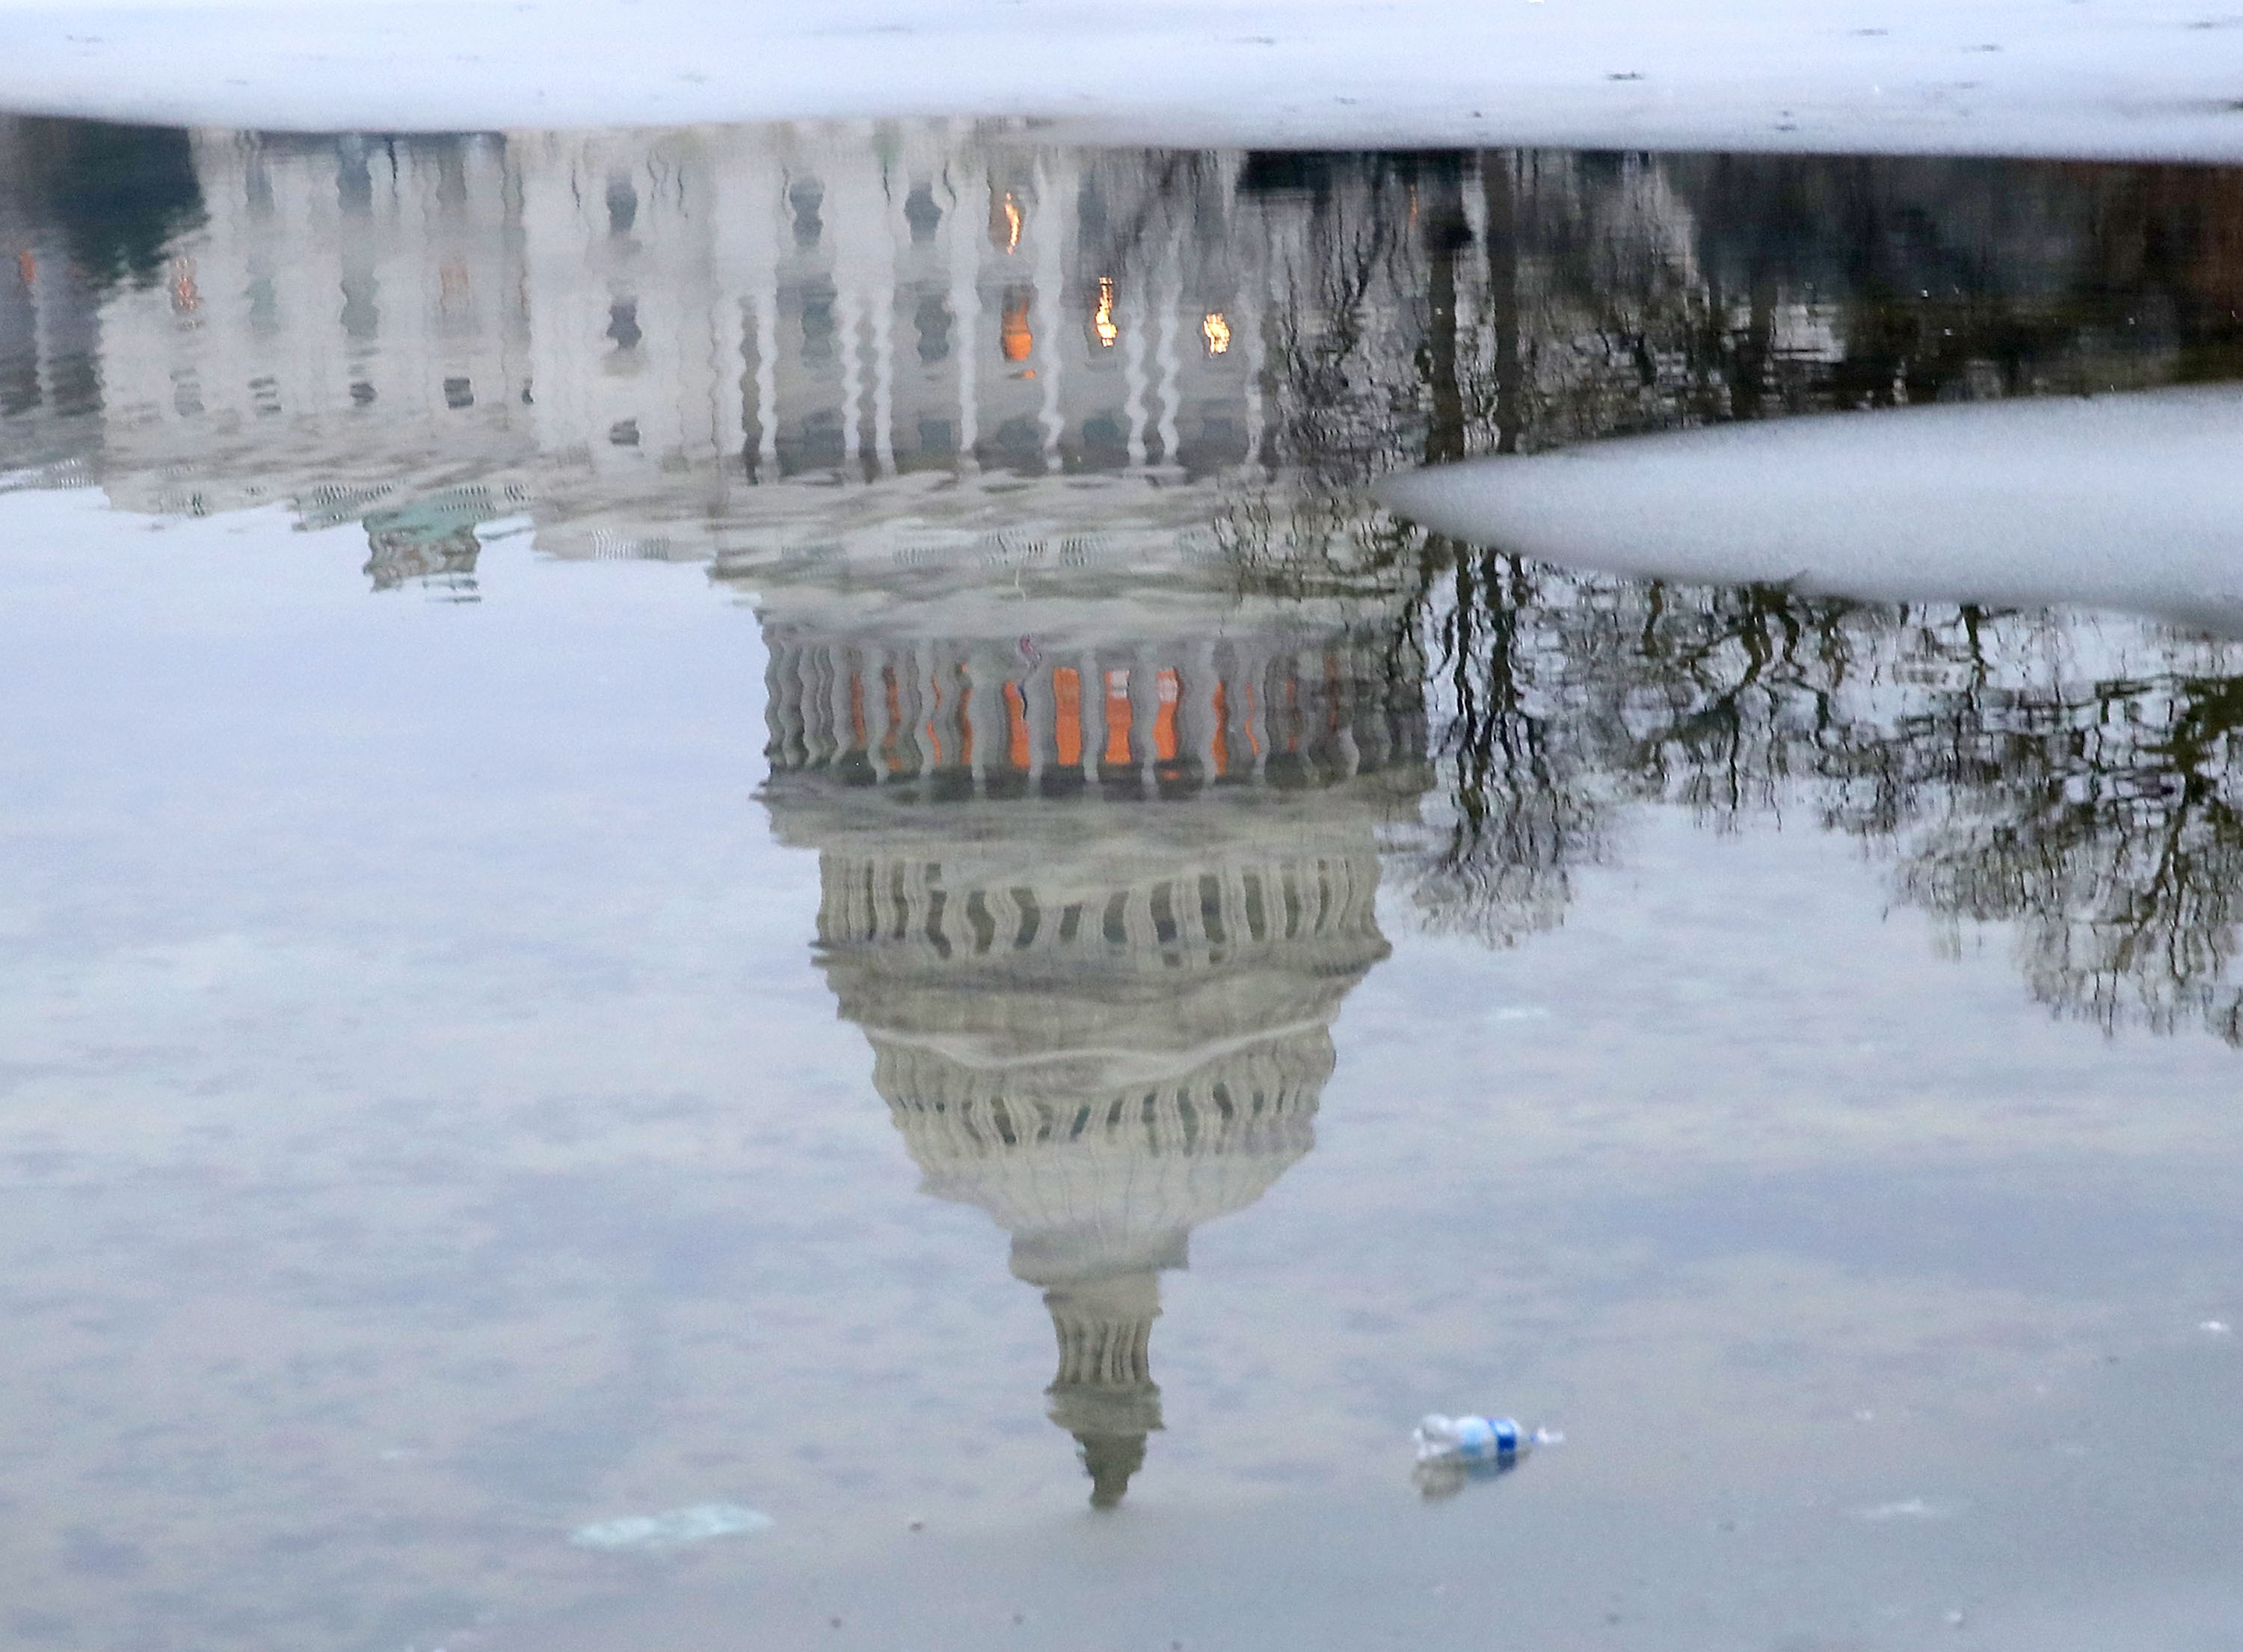 The US Capitol is reflected onto a partially frozen reflecting pool on Friday.